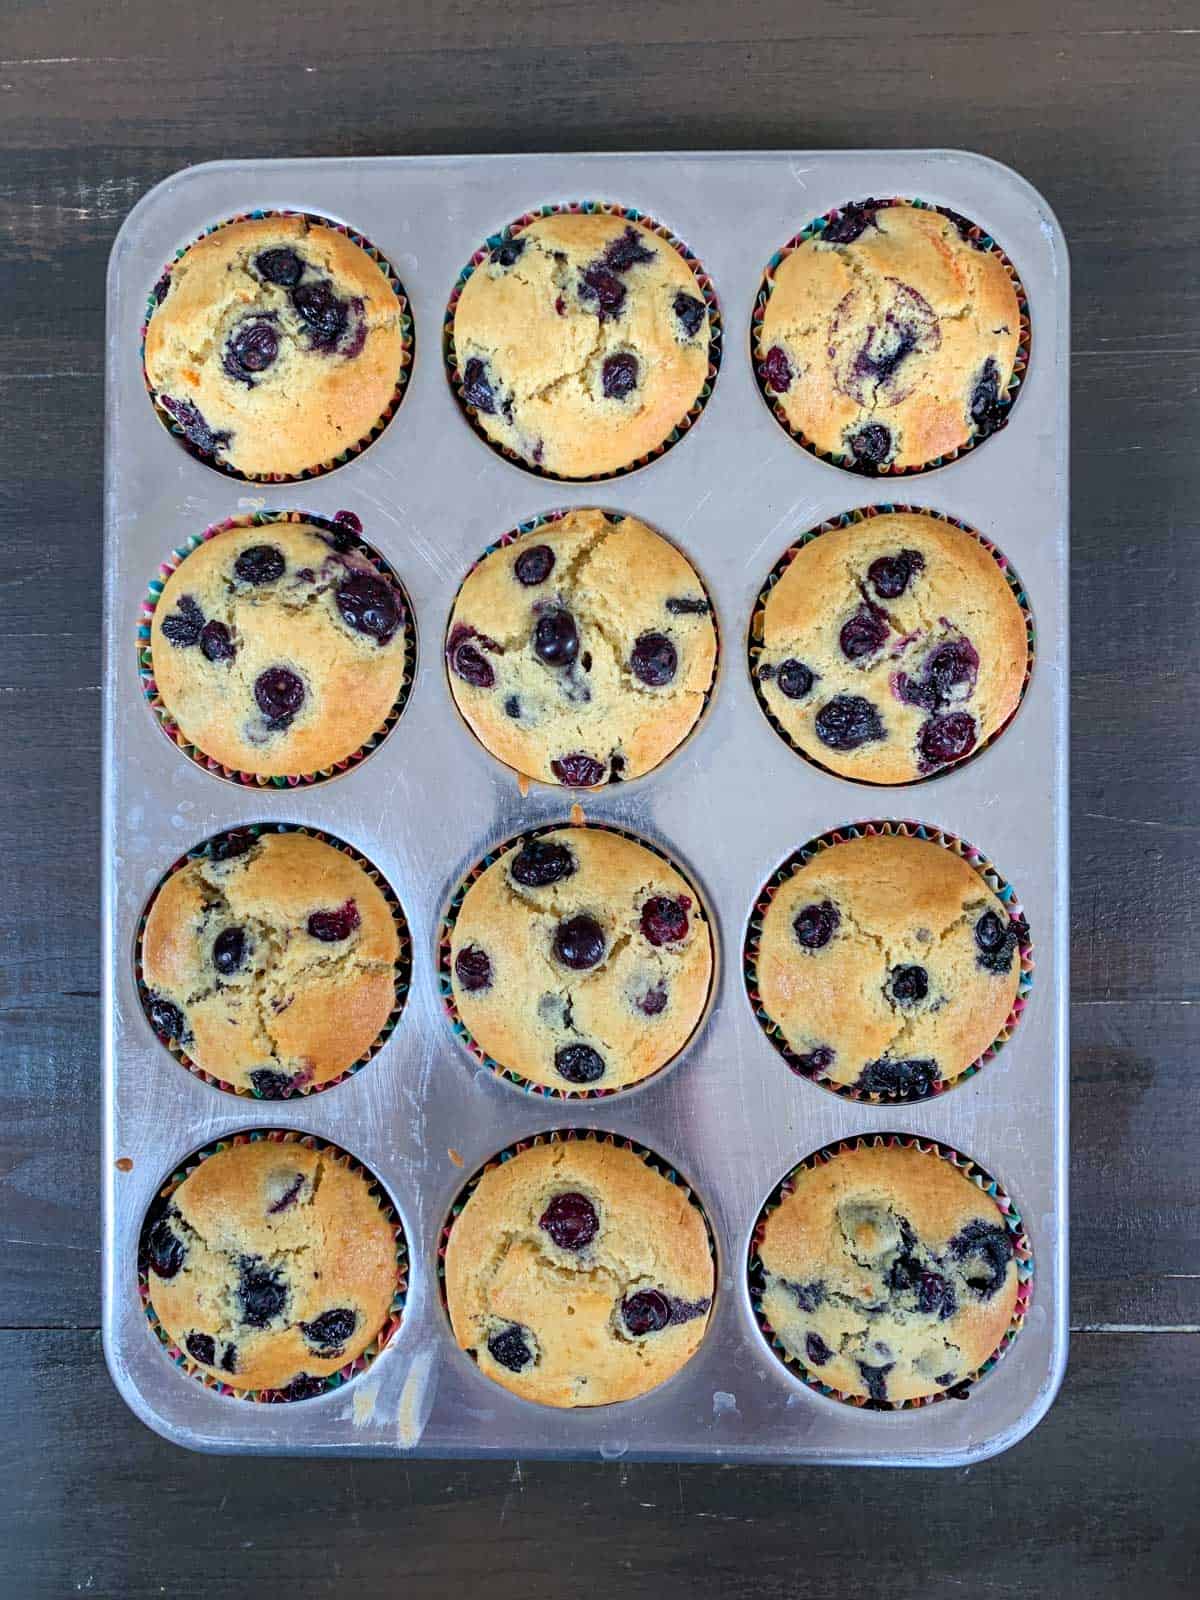 baked old-fashioned blueberry muffins in the muffin tray.